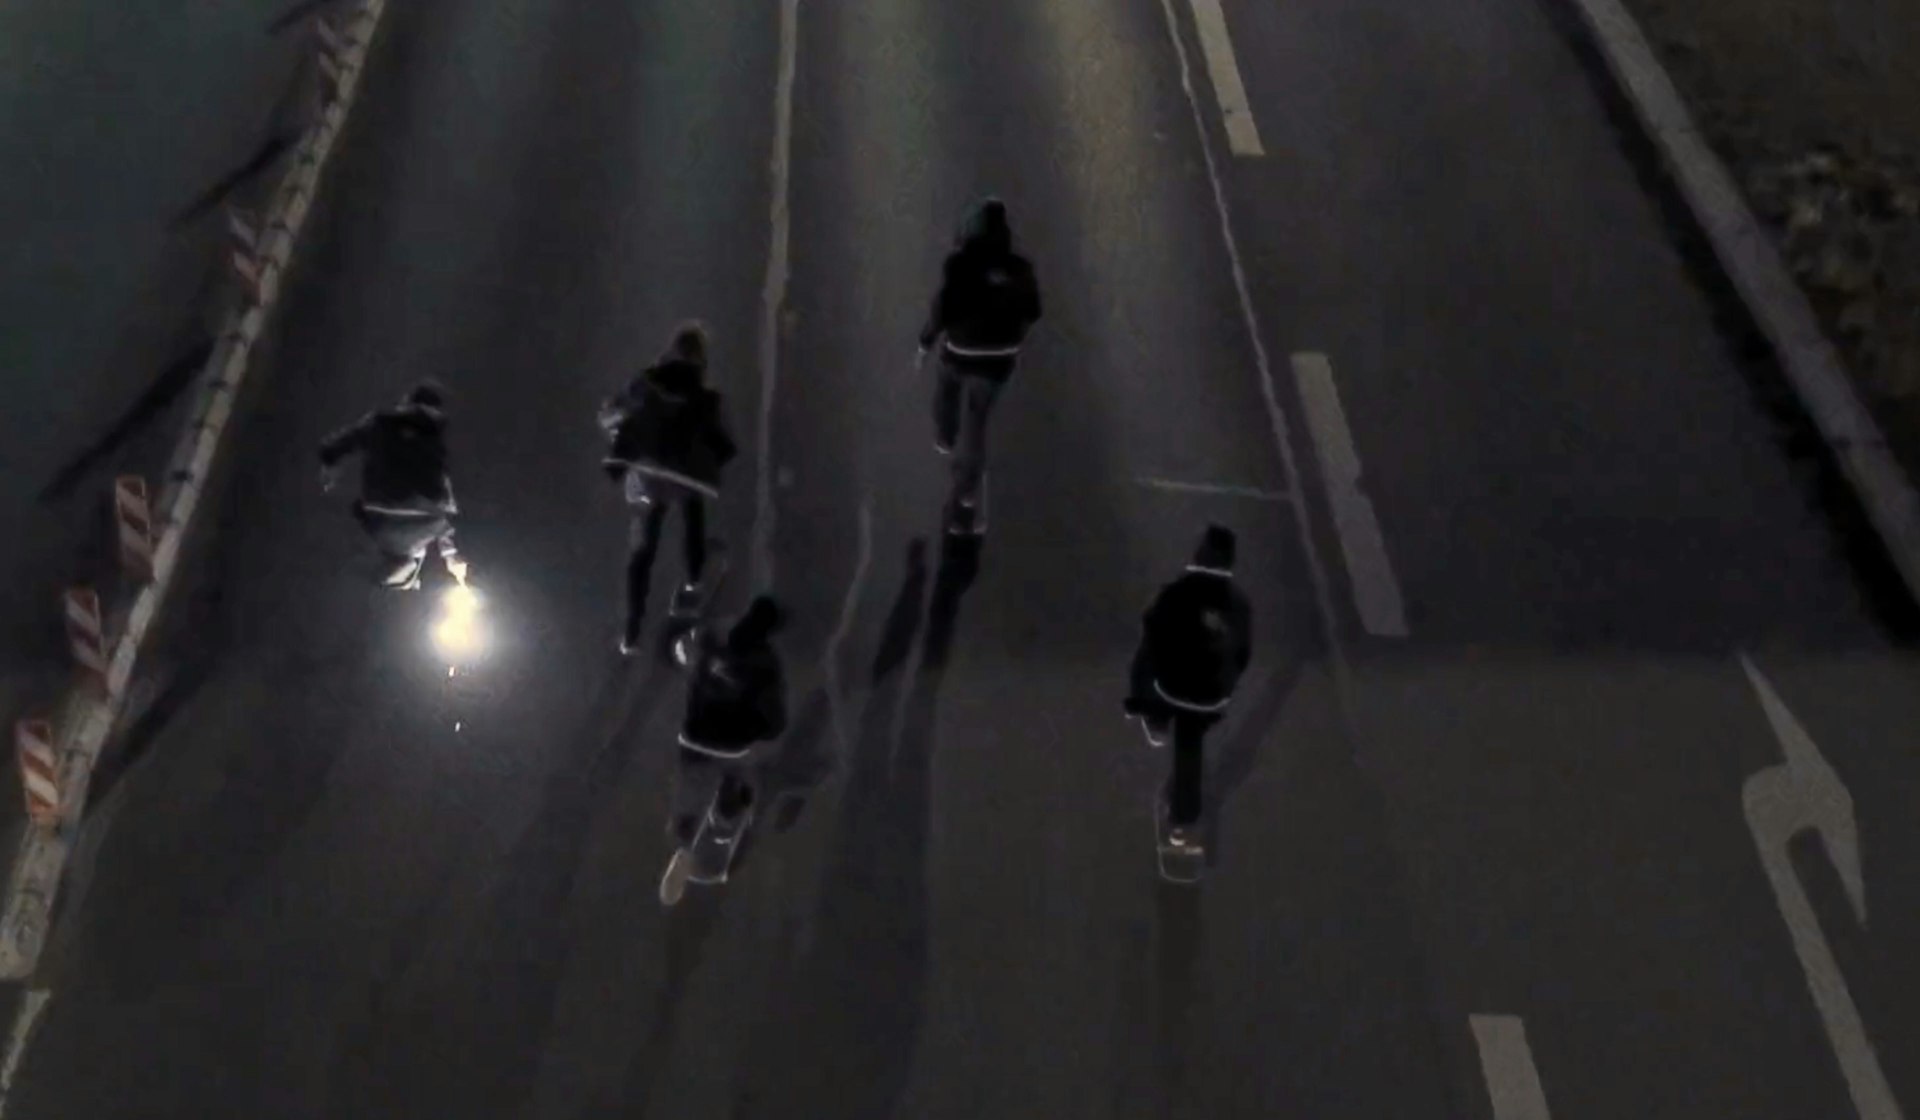 Video: Skaters take over the deserted, midnight streets of Dresden